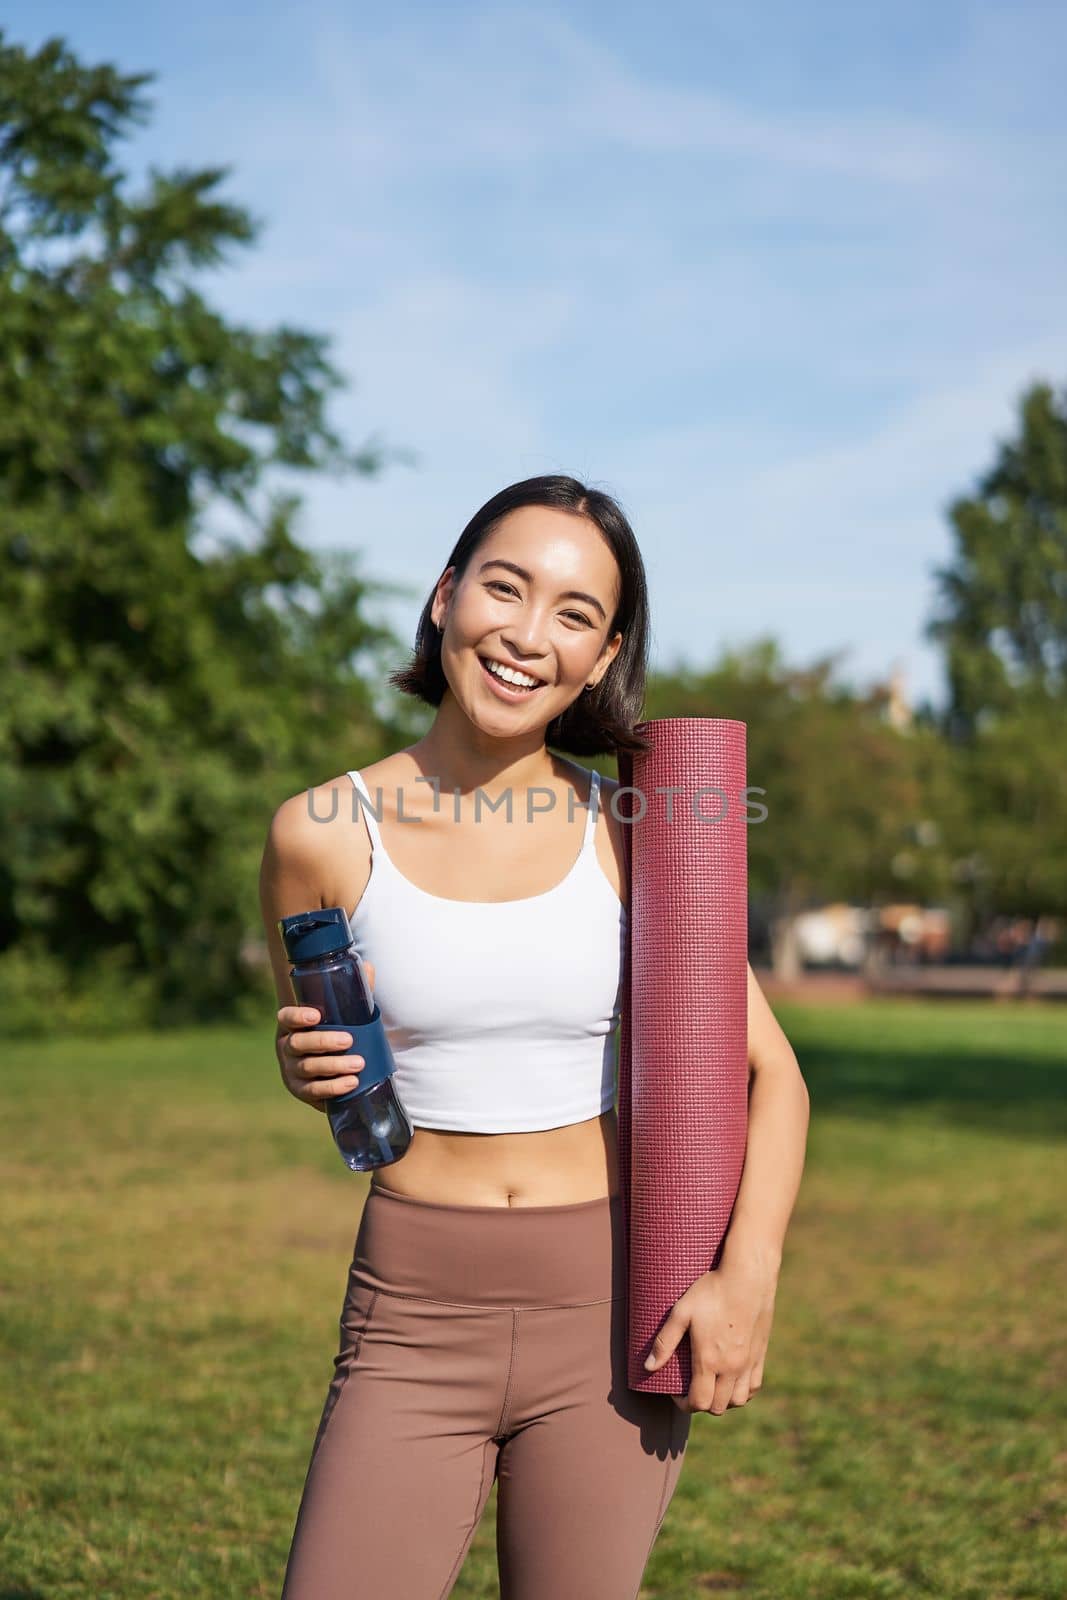 Portrait of young slim and healthy korean girl doing workout in park, standing with water bottle and rubber mat for execises on green lawn, smiling happily.